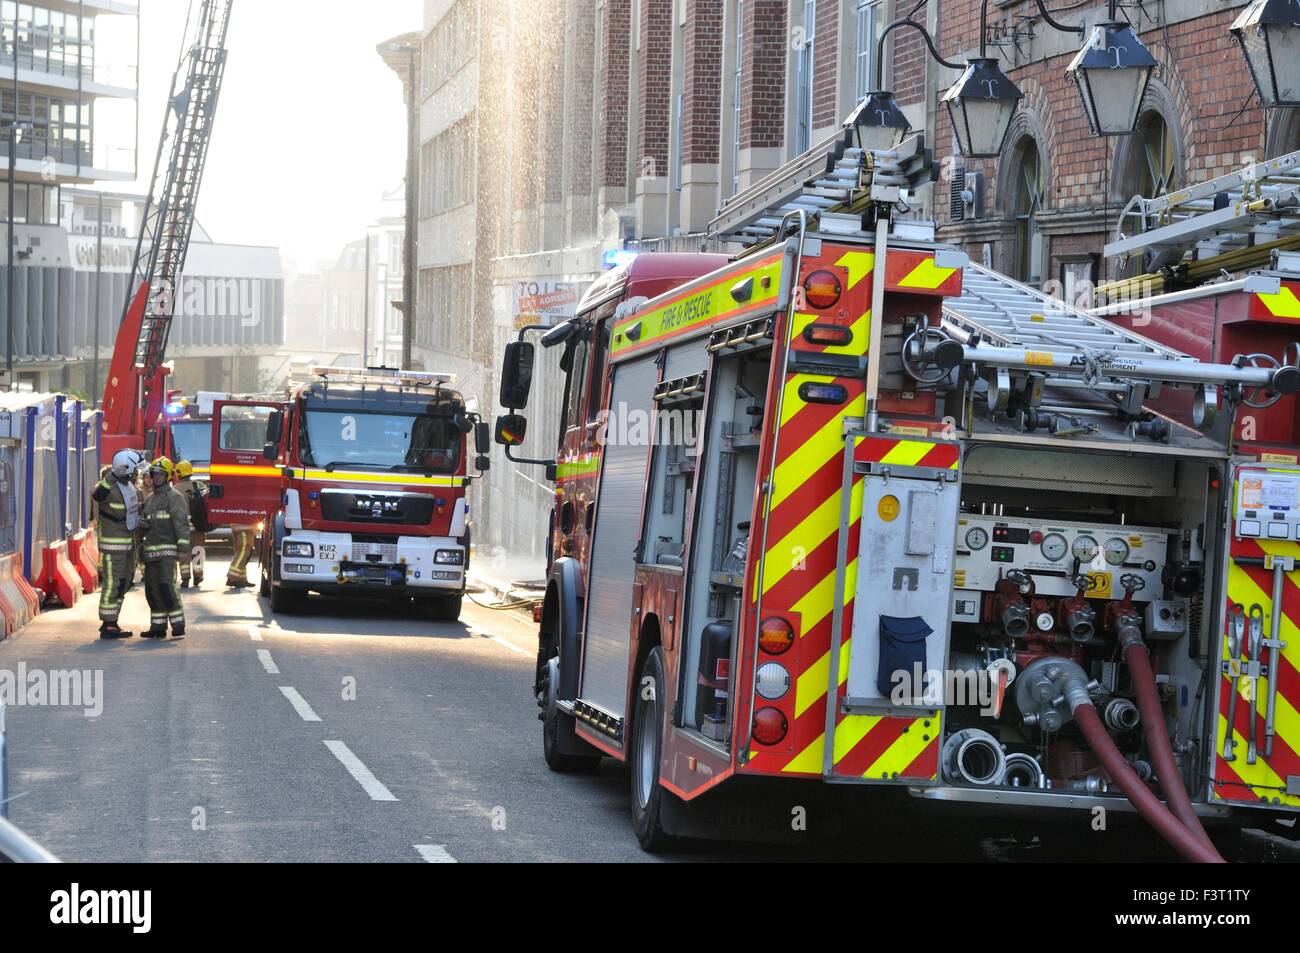 A major fire started about 13:00hr in University of Bristol Student accommodation, 33 Colston Street, Bristol, England, 12 October 2015, tackled by Avon Fire & Rescue services with two turntable ladder fire engines and more than four other engines. The location is between the Colston Hall and Griffin pub near the junction of Colston Street and Trenchard Street and these roads have been closed to both vehicles and pedestrians. The blaze has completely destroyed the whole length of roof and top floor.  Credit:  Charles Stirling/Alamy Live News Stock Photo